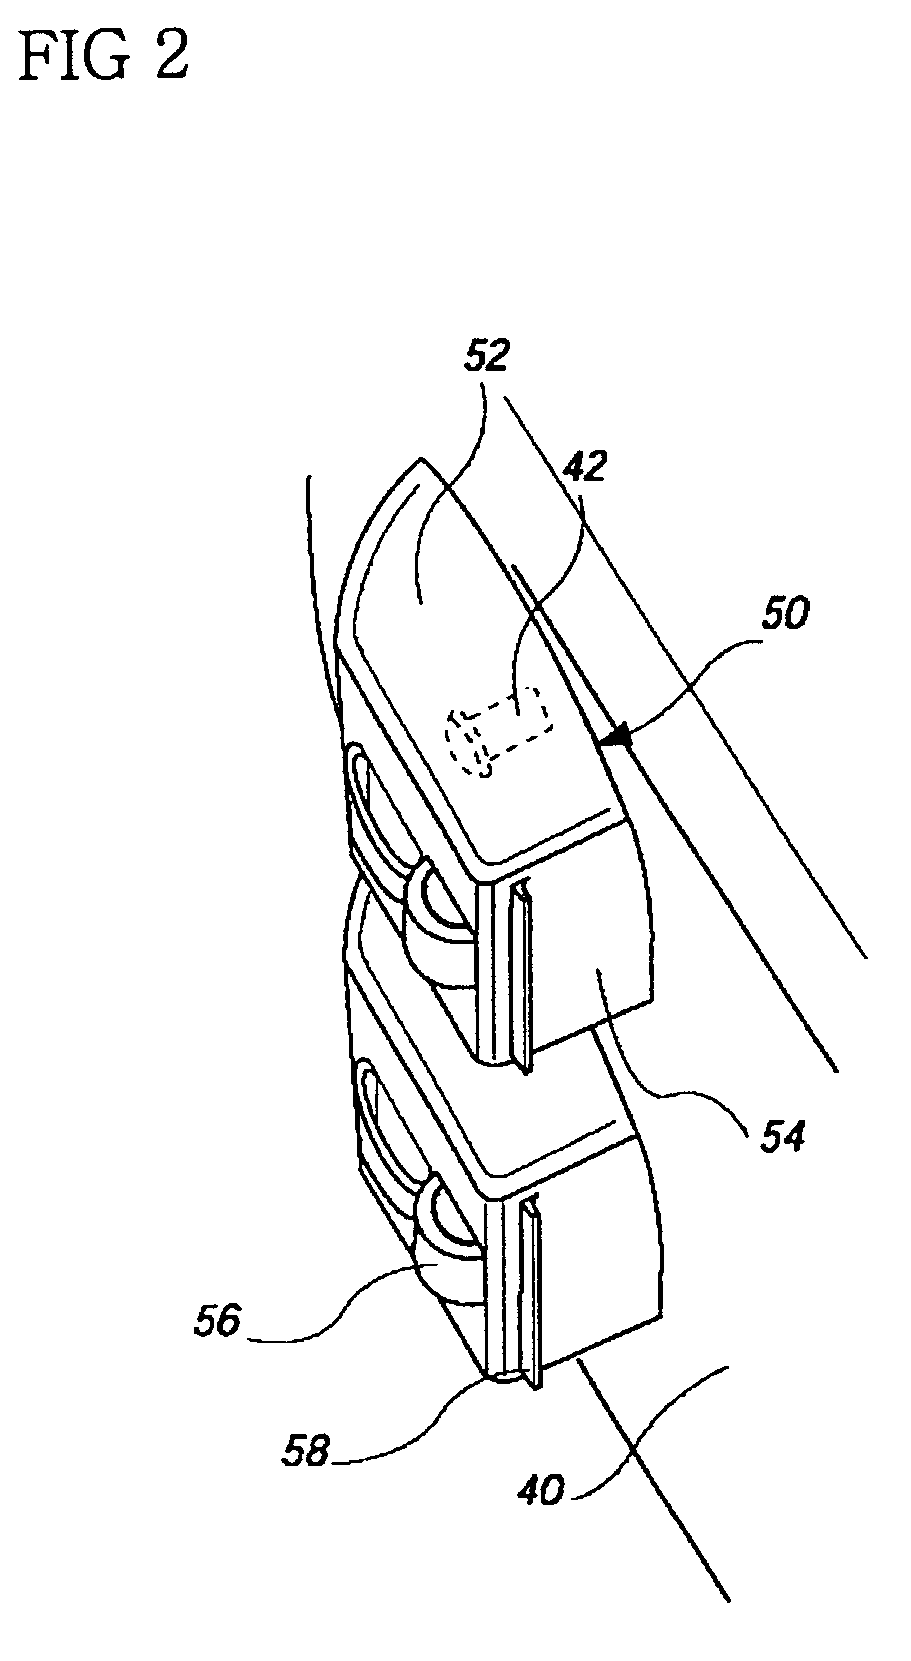 Caster for vacuum cleaner and vacuum cleaner having the same